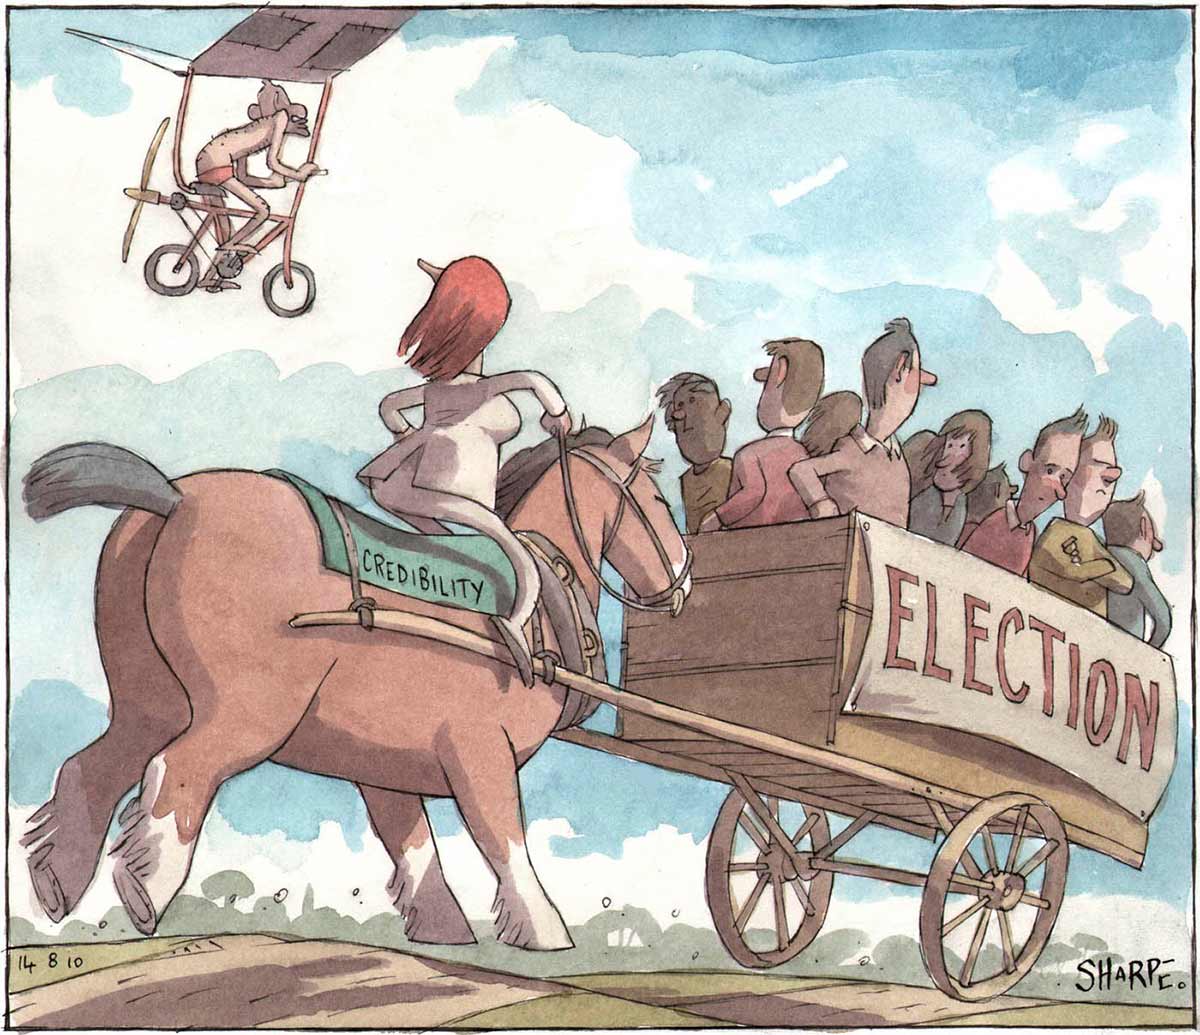 Political cartoon depicting Julia Gillard galloping across a landscape on a large horse. The horse has 'Credibility' on the blanket on its back, and is attached to a cart in front of it. On the side of the cart is a sign that says 'Election'. In the cart are several people, looking in different directions. One man has his arms folded and looks annoyed. In the sky nearby, Tony Abbott is seen pedalling a flying bicycle, with wings and a propellor on the back. He heads in the same direction as Gillard, and wears a pair of red swimming trunks. She looks up at him. - click to view larger image